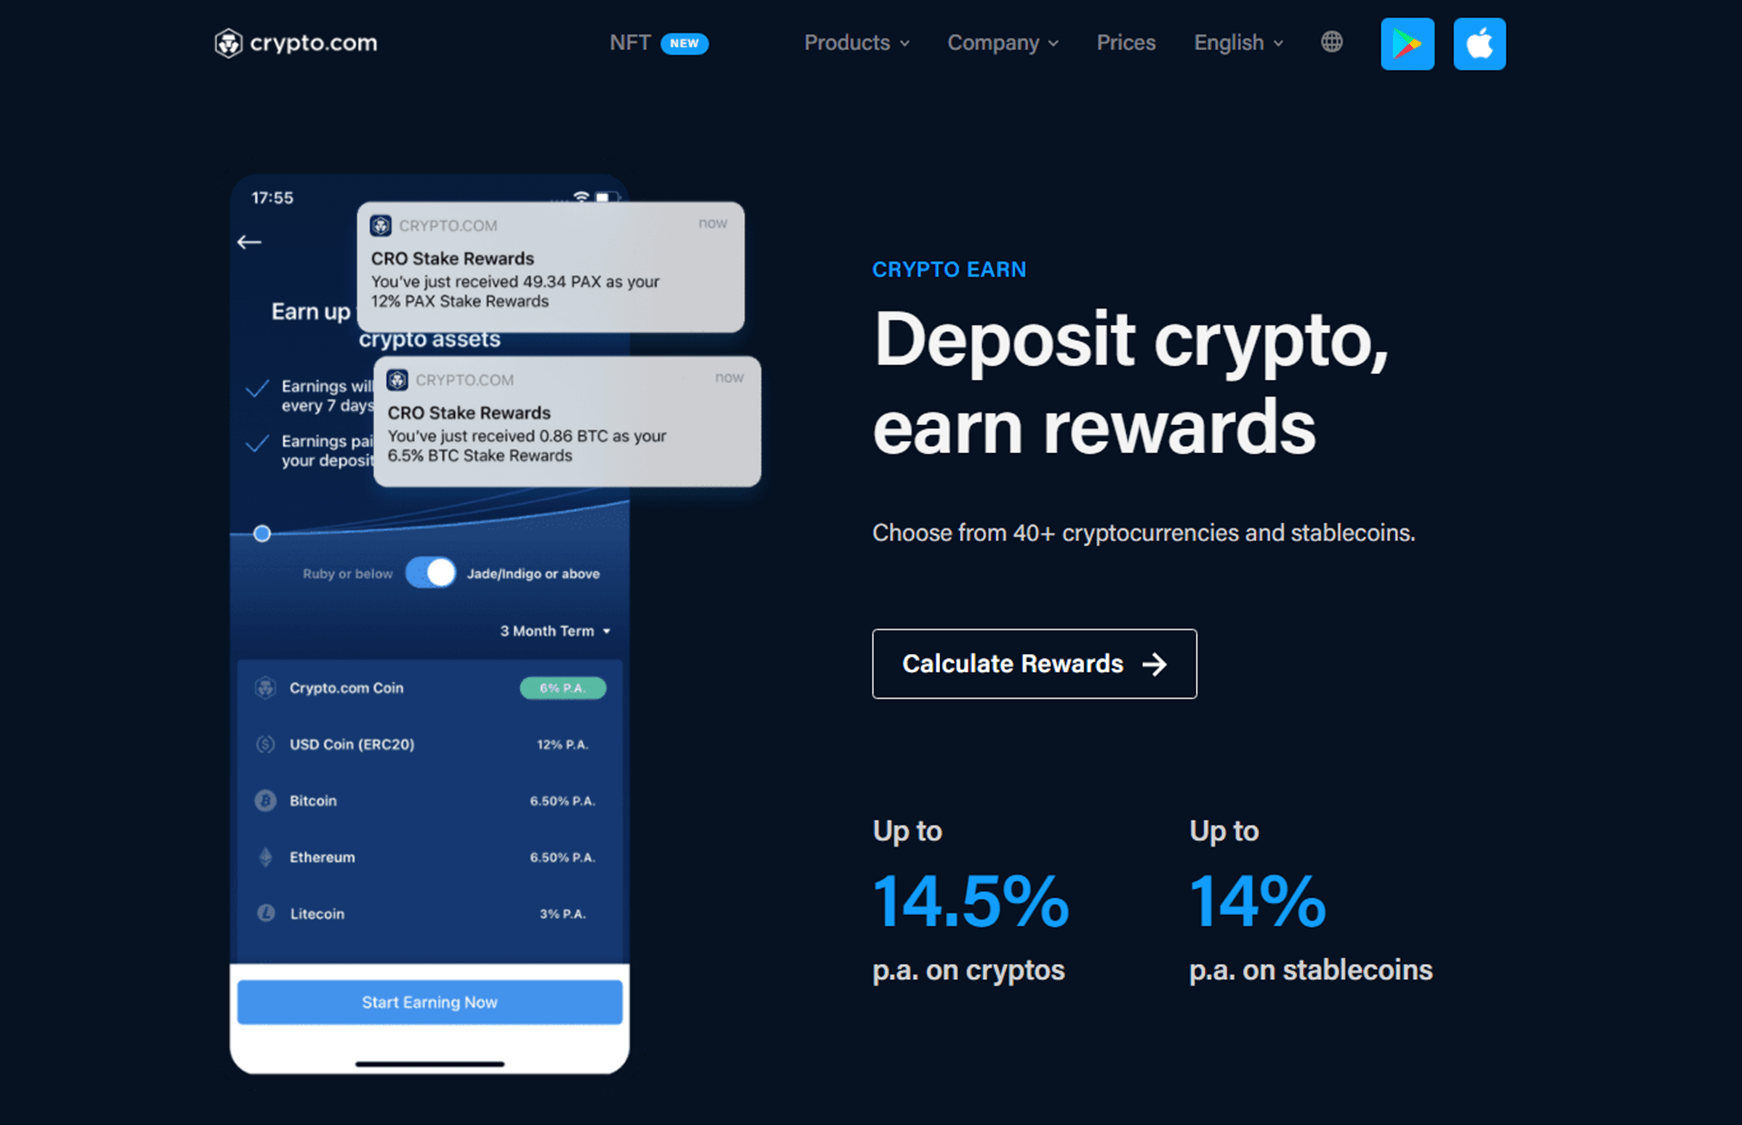 How To Stake and Earn Rewards On Crypto.Com